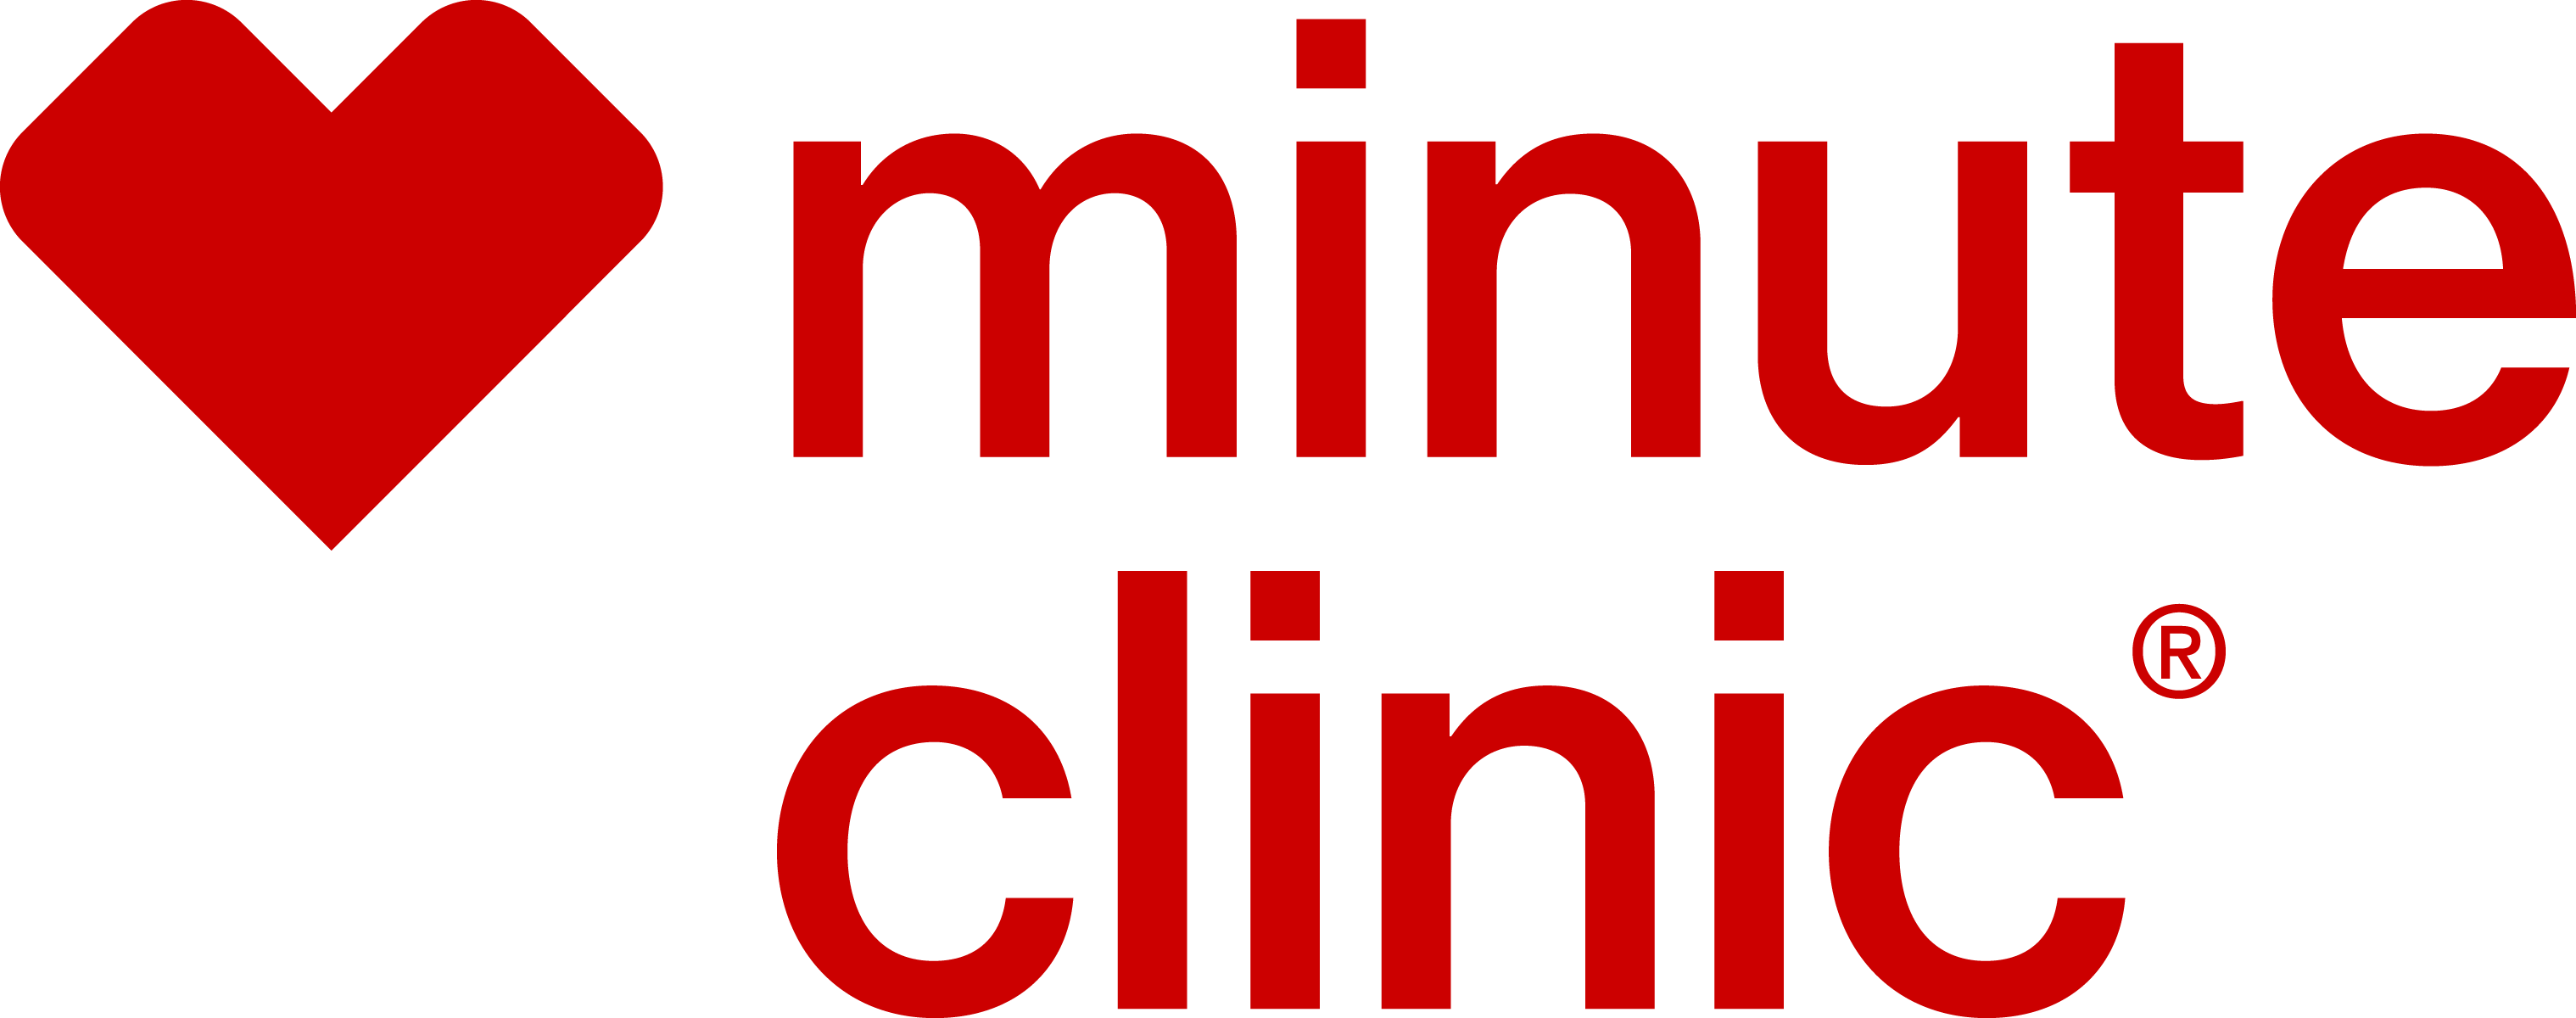 CVS Minute Clinic Appointment